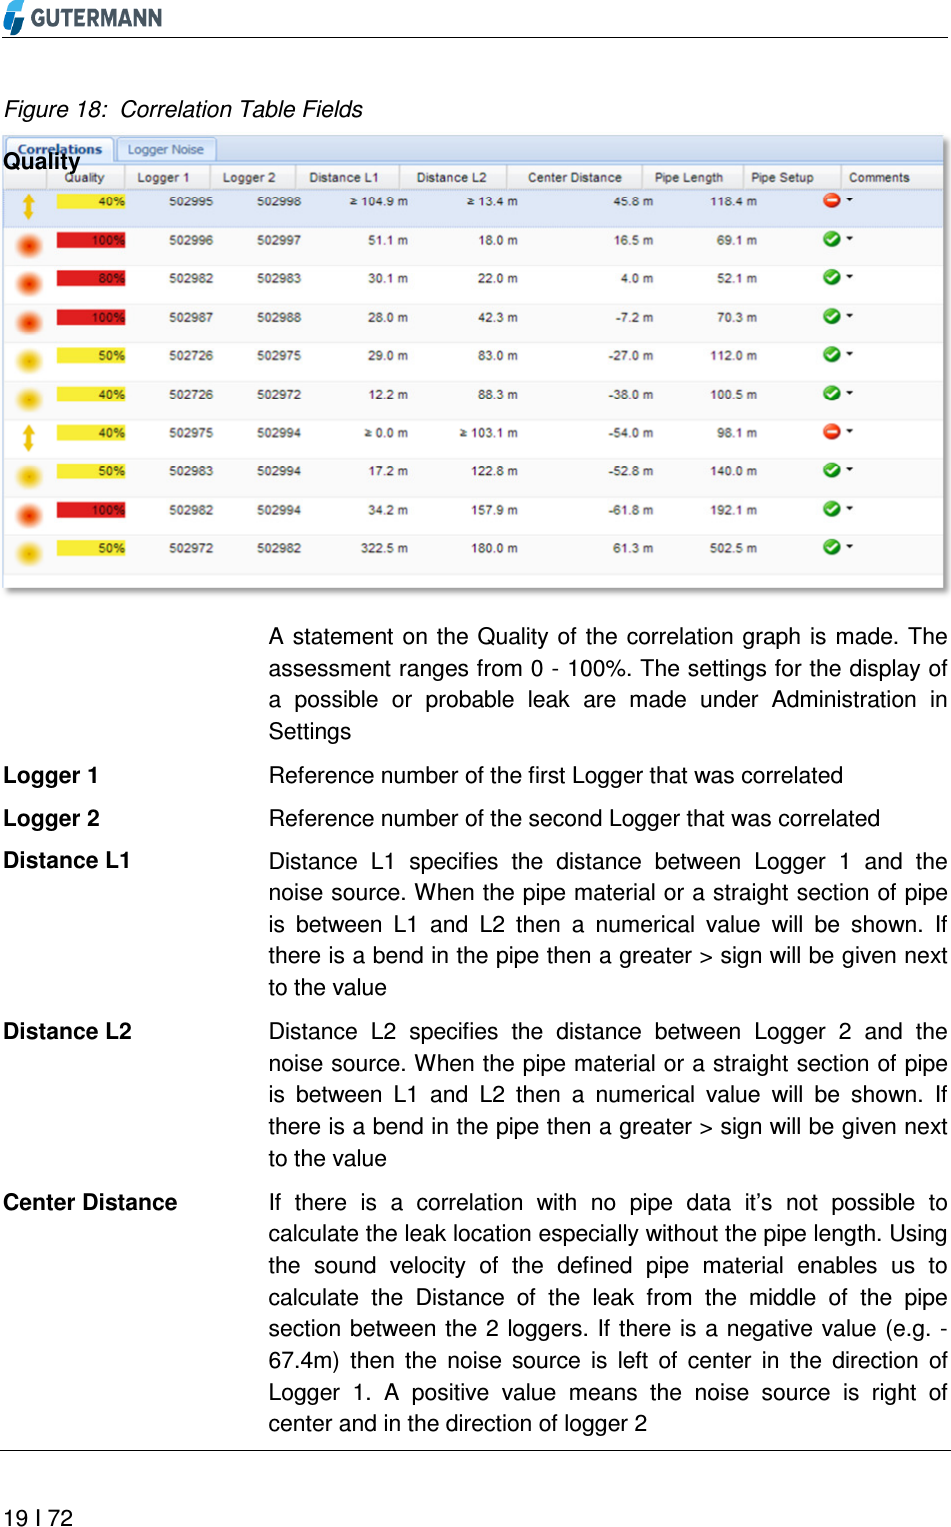       19 I 72  Figure 18:  Correlation Table Fields A statement on the Quality of the  correlation graph is made. The assessment ranges from 0 - 100%. The settings for the display of a  possible  or  probable  leak  are  made  under  Administration  in Settings  Reference number of the first Logger that was correlated Reference number of the second Logger that was correlated Distance  L1  specifies  the  distance  between  Logger  1  and  the noise source. When the pipe material or a straight section of pipe is  between  L1  and  L2  then  a  numerical  value  will  be  shown.  If there is a bend in the pipe then a greater &gt; sign will be given next to the value Distance  L2  specifies  the  distance  between  Logger  2  and  the noise source. When the pipe material or a straight section of pipe is  between  L1  and  L2  then  a  numerical  value  will  be  shown.  If there is a bend in the pipe then a greater &gt; sign will be given next to the value If  there  is  a  correlation  with  no  pipe  data  it’s  not  possible  to calculate the leak location especially without the pipe length. Using the  sound  velocity  of  the  defined  pipe  material  enables  us  to calculate  the  Distance  of  the  leak  from  the  middle  of  the  pipe section between the 2 loggers. If  there is a negative value (e.g. -67.4m)  then  the  noise  source  is  left  of  center  in  the  direction  of Logger  1.  A  positive  value  means  the  noise  source  is  right  of center and in the direction of logger 2 Quality Logger 1 Logger 2 Distance L1 Distance L2 Center Distance 